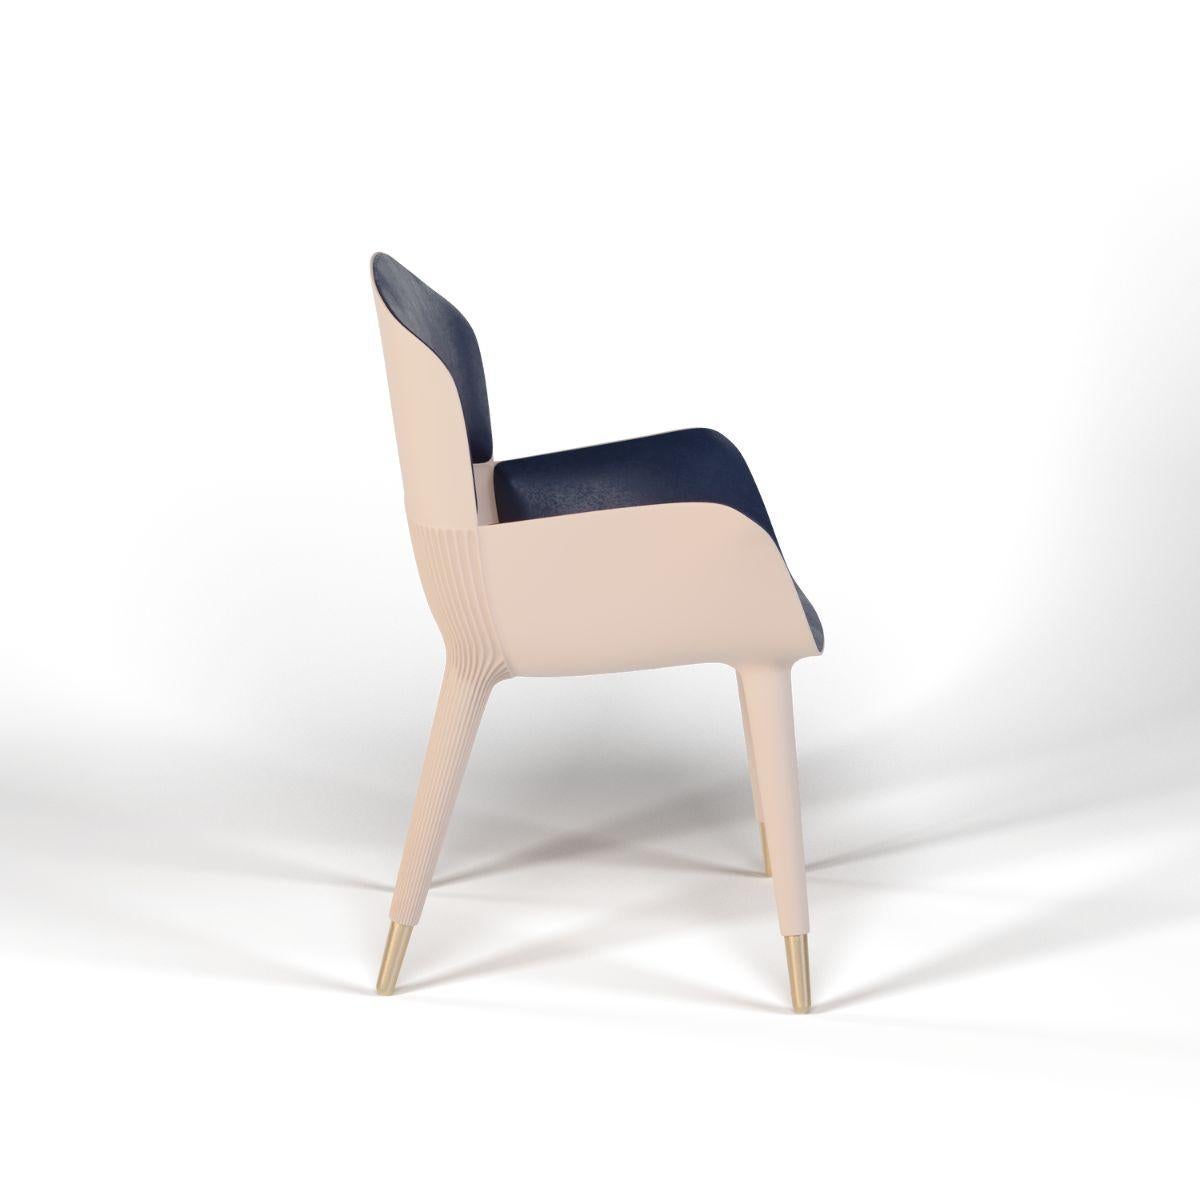 Eleanor Dining Chair 

The Eleanor dining armchair is a piece whose starting point is comfort and functionality. Its simple design, feminine curves, and undulating texture highlight and enrich its key points - legs, backrest and seat. The final